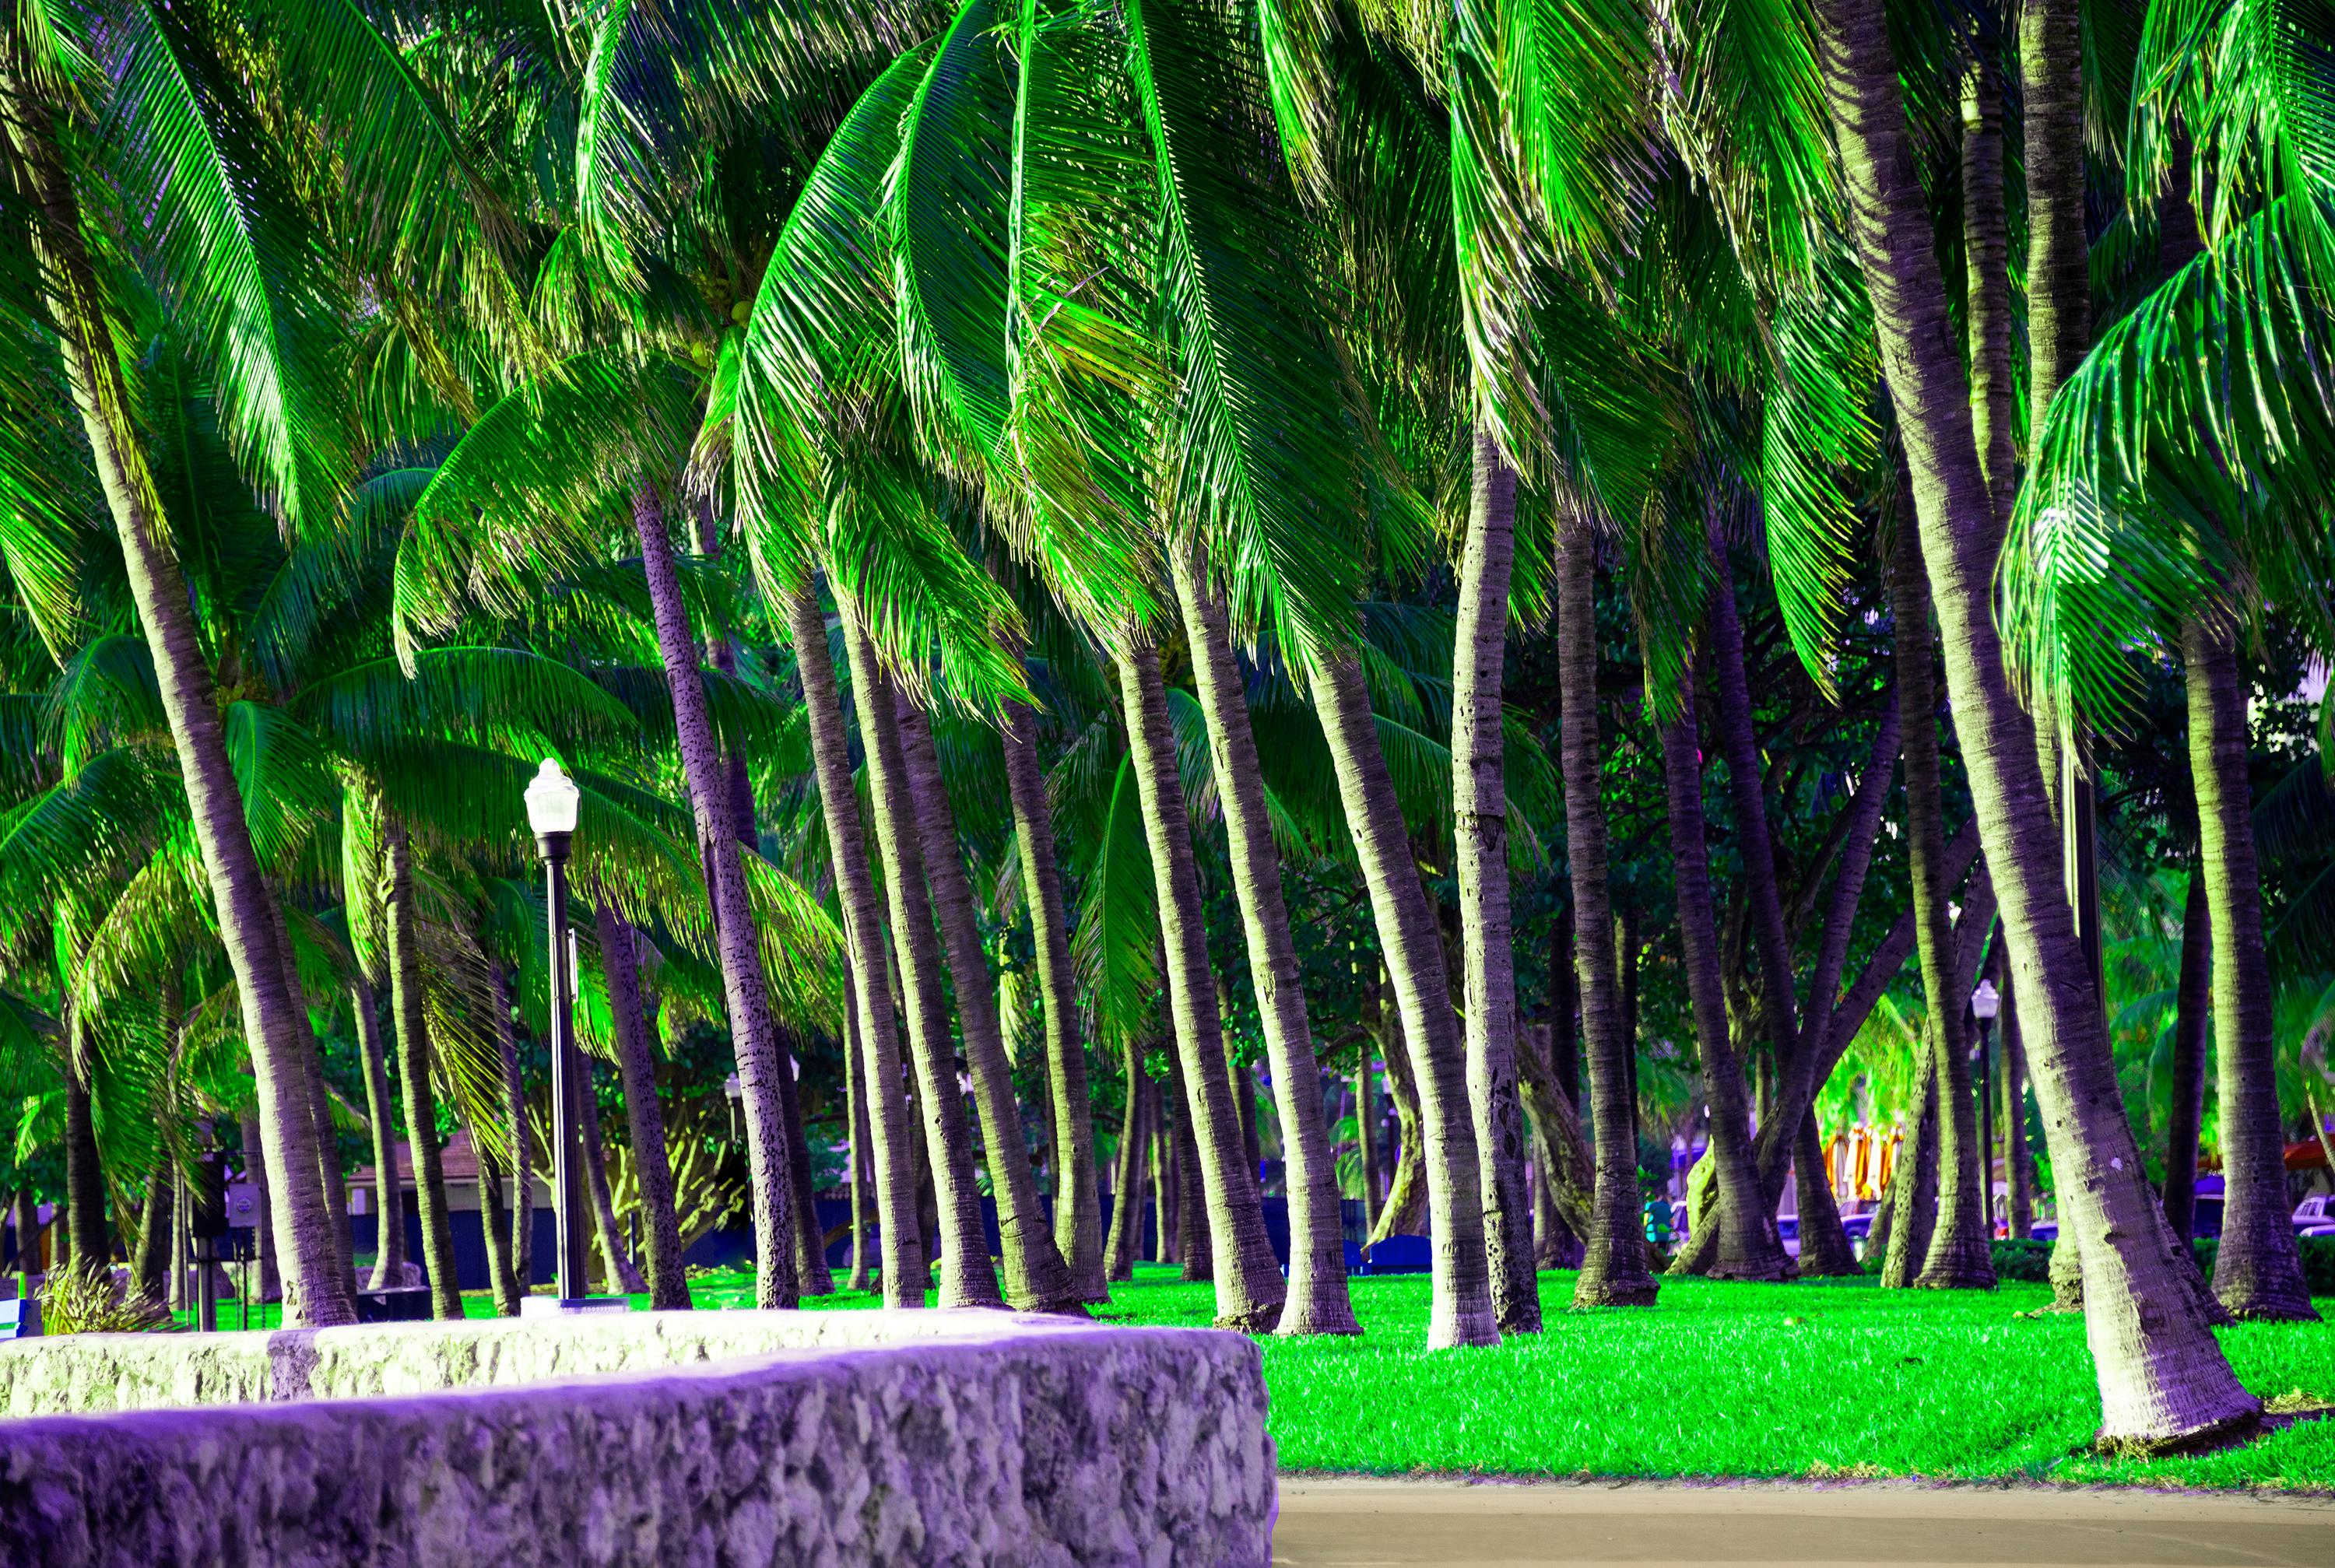 Robert Funk Landscape Photograph - South Beach Tropical Palm Trees in Miami 